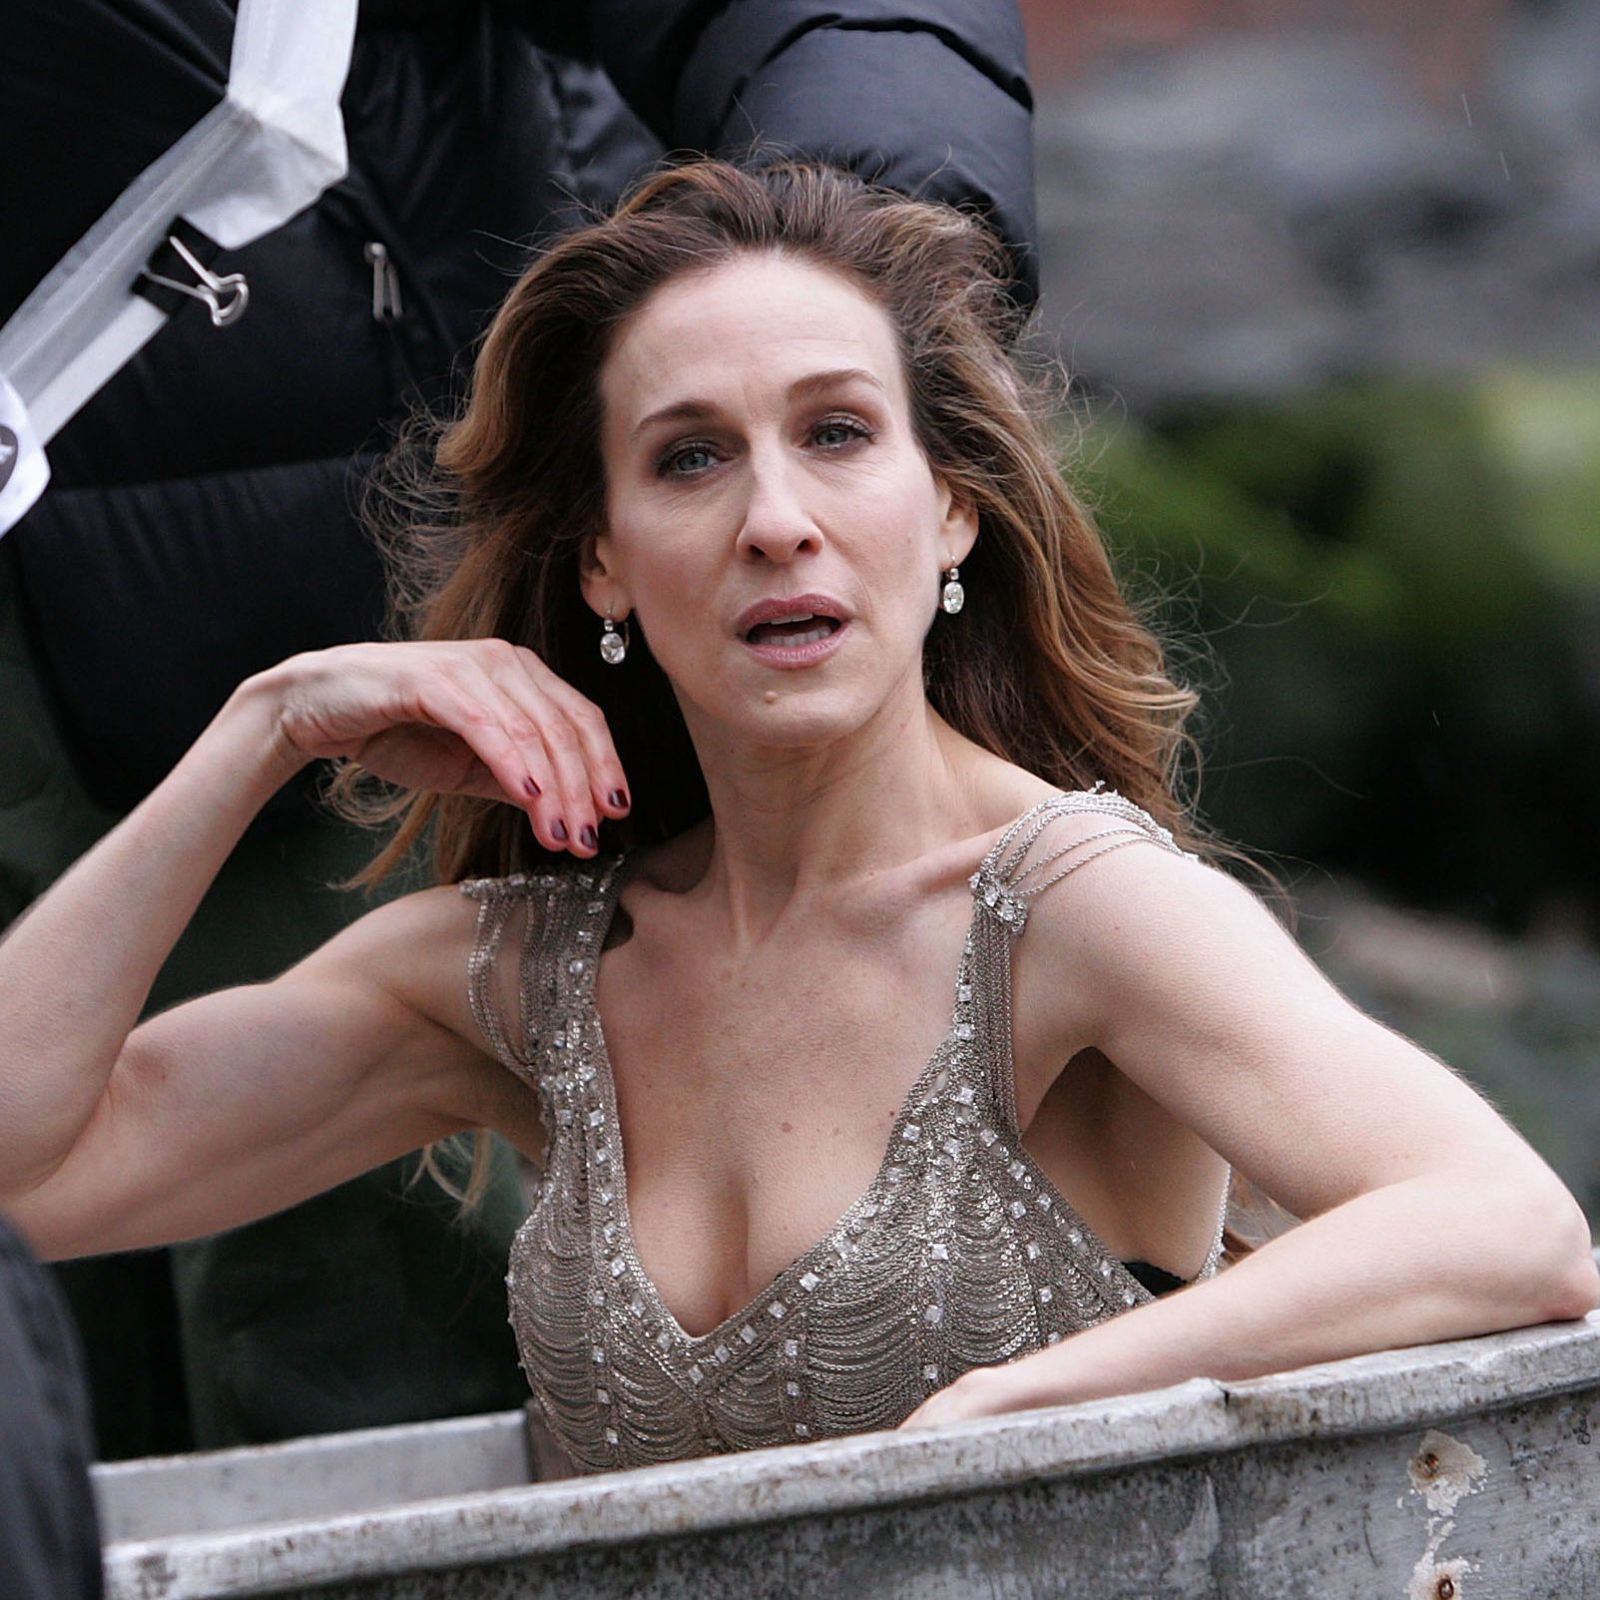 Sarah Jessica Parker Details How She Wept As Producers Tried To Get Her To Film Nude